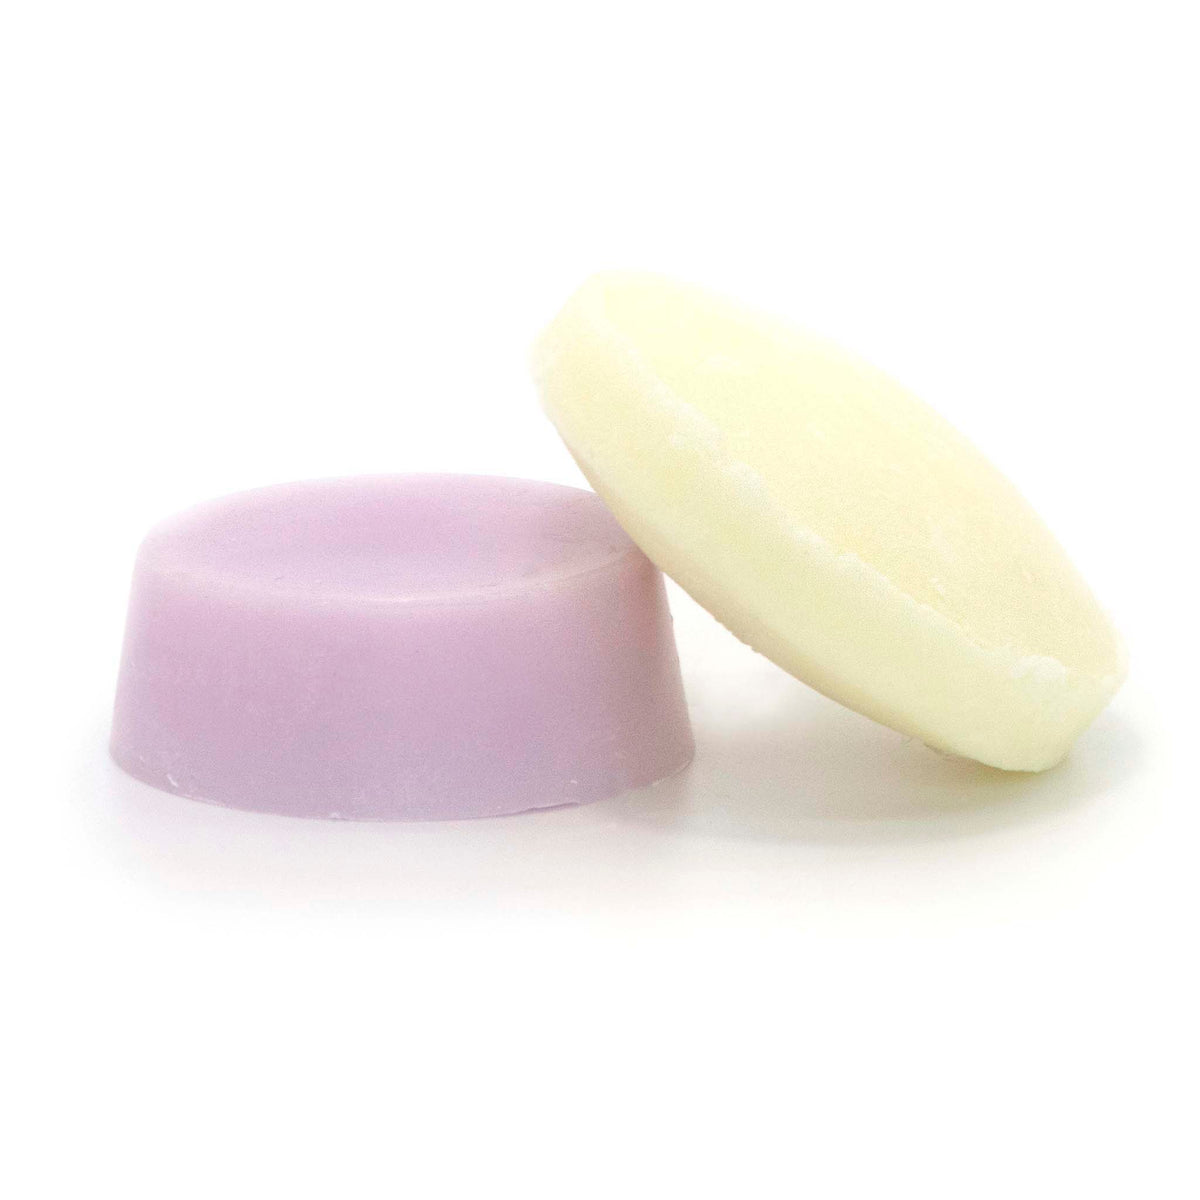 made in vernon bc shampoo and conditioner bar